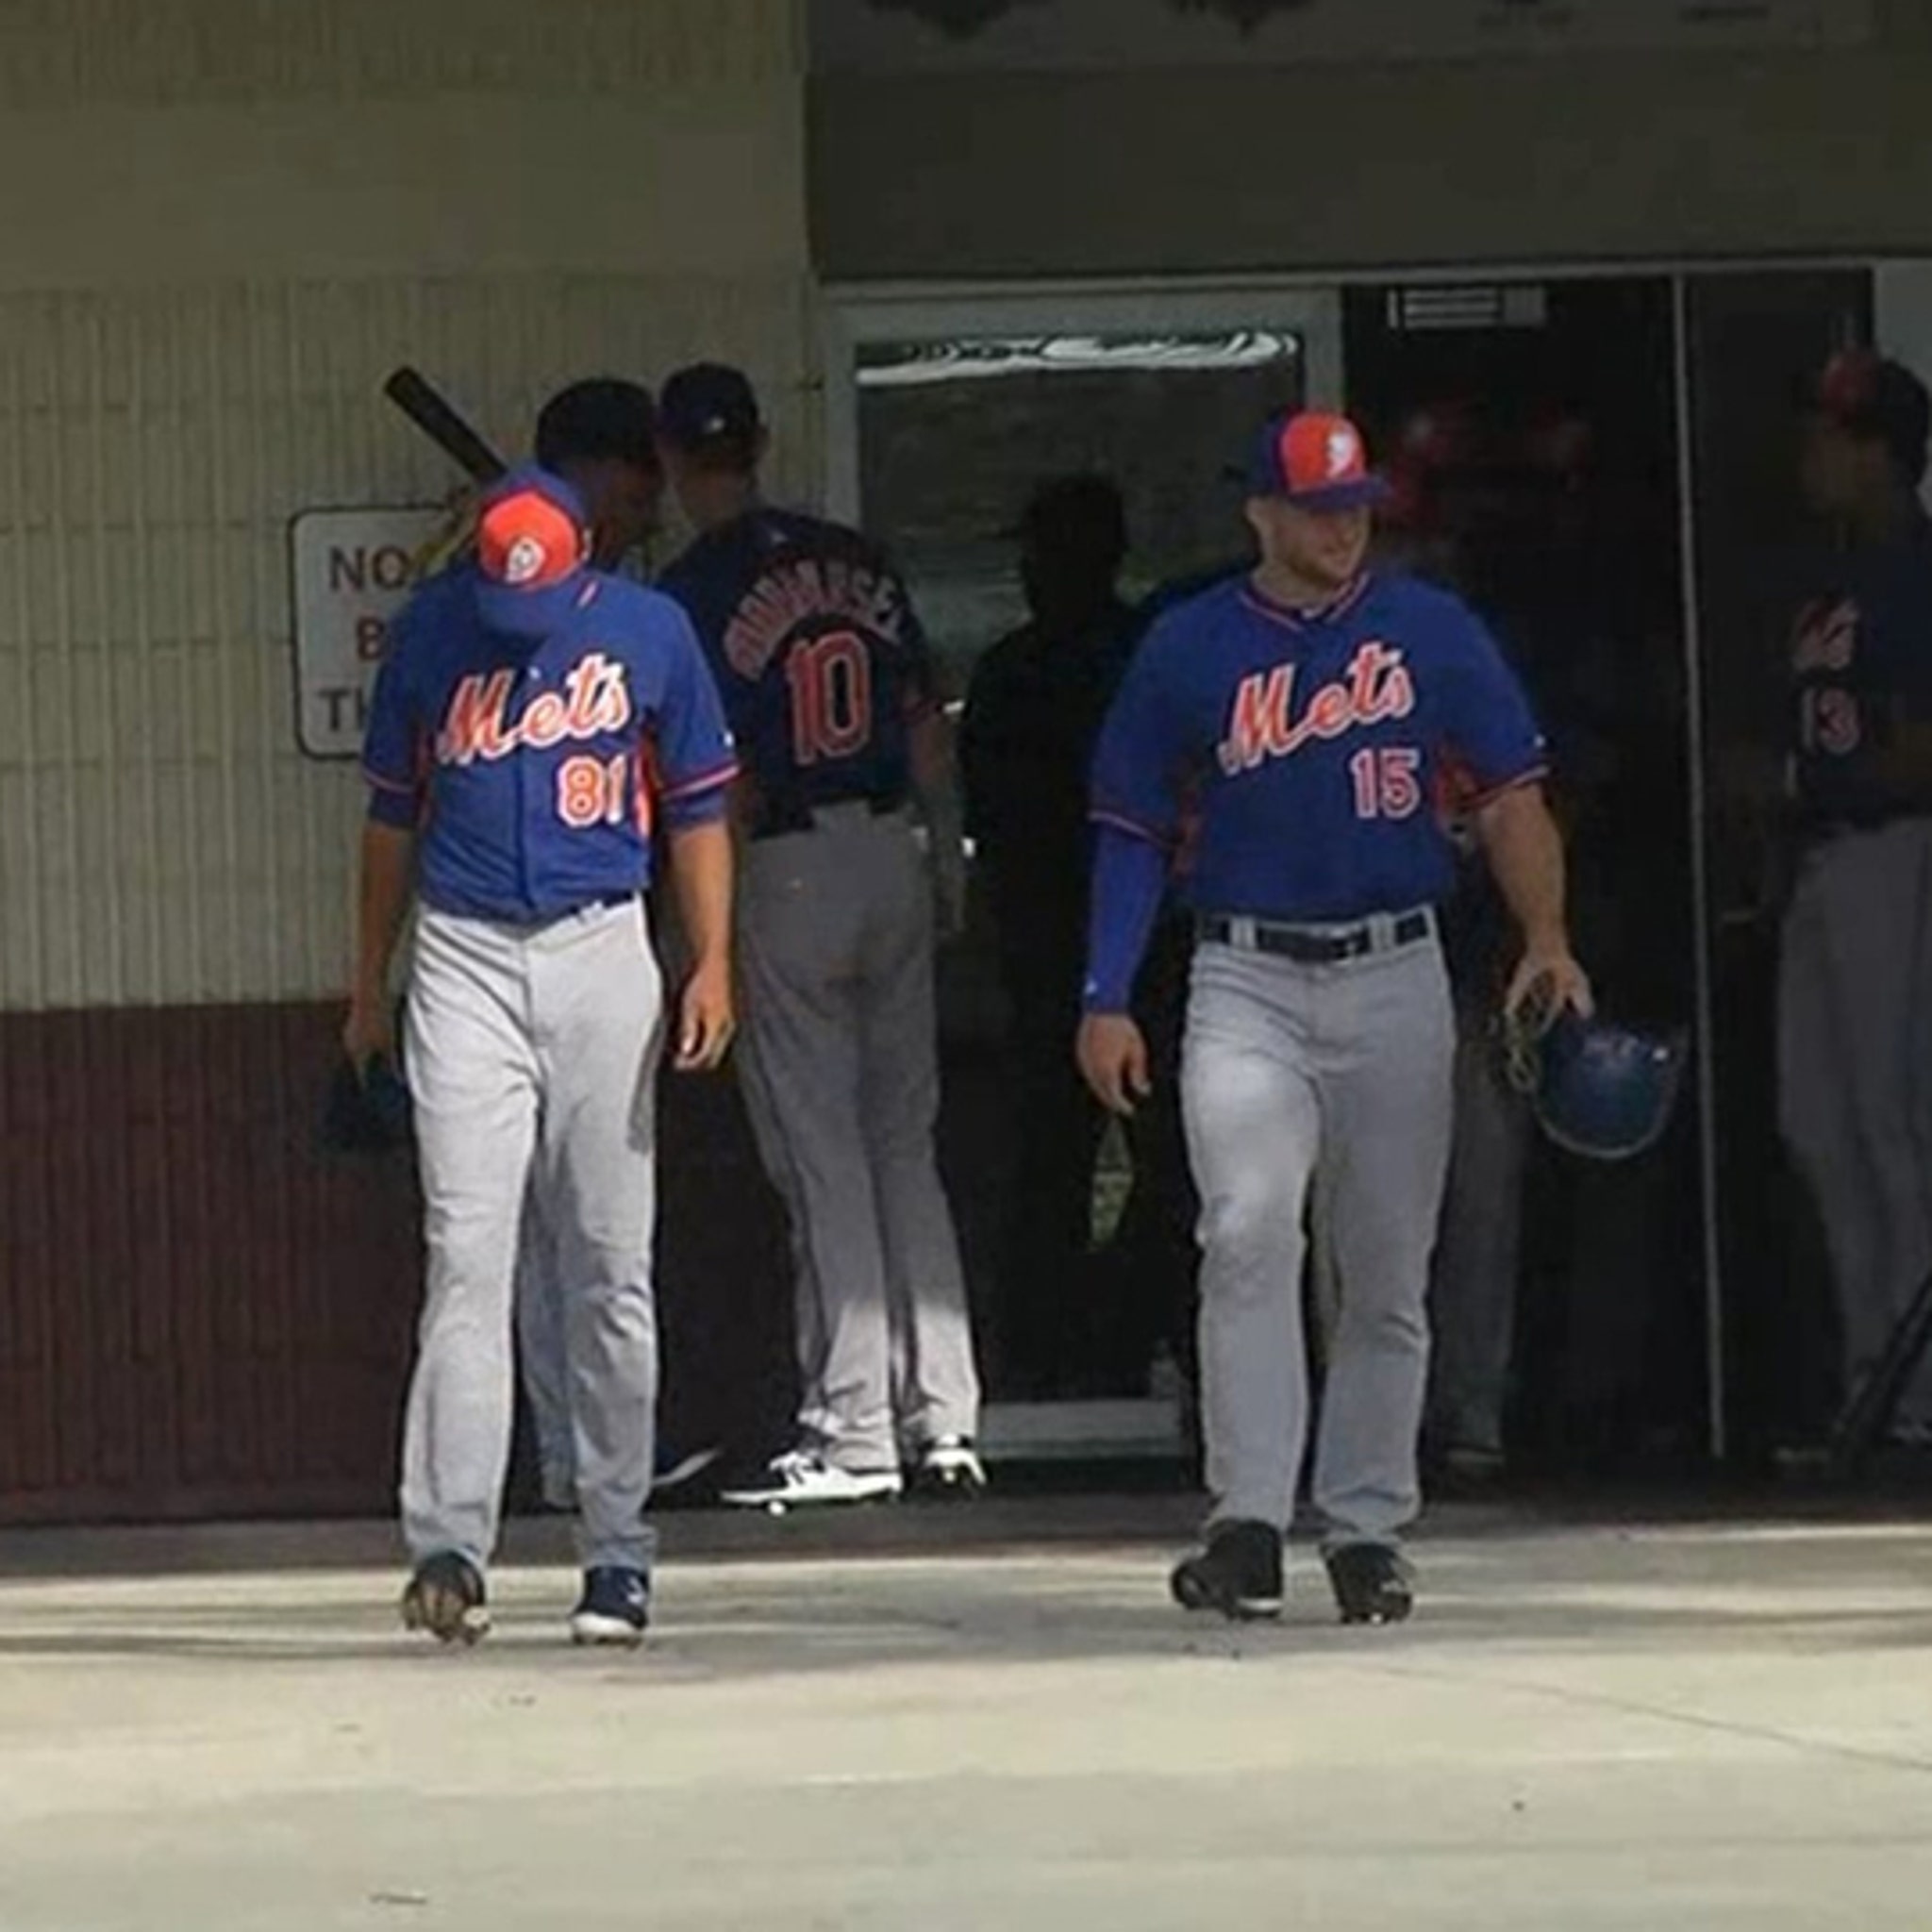 Tim Tebow works out at New York Mets camp, wearing No. 15 in